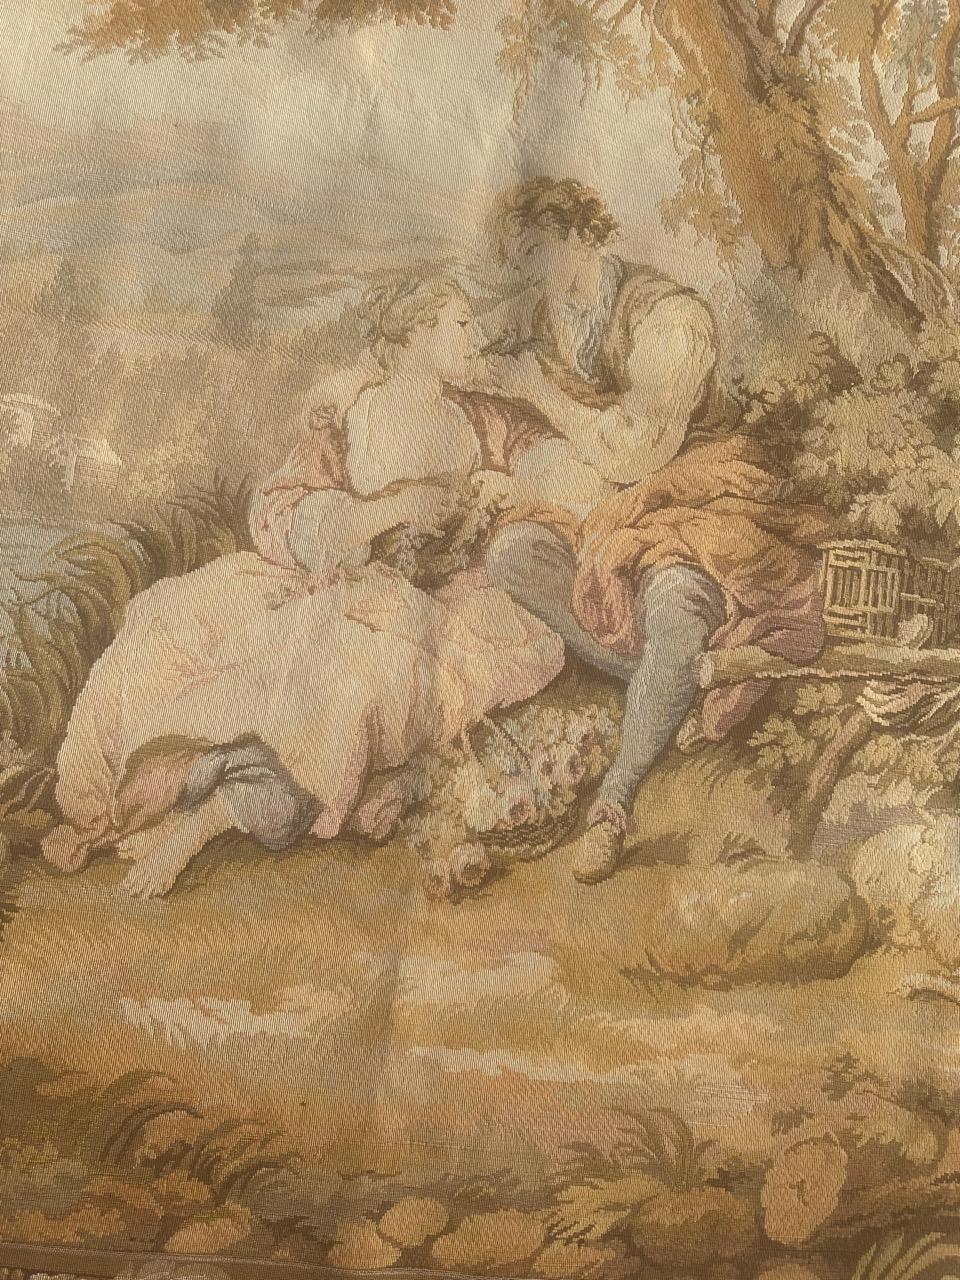 Elevate your space with this exquisite Aubusson-style tapestry featuring a romantic depiction of a loving couple in the countryside, nestled under a tree. Sheep graze nearby, and a gentle river flows in the background. The soft hues of yellow, light